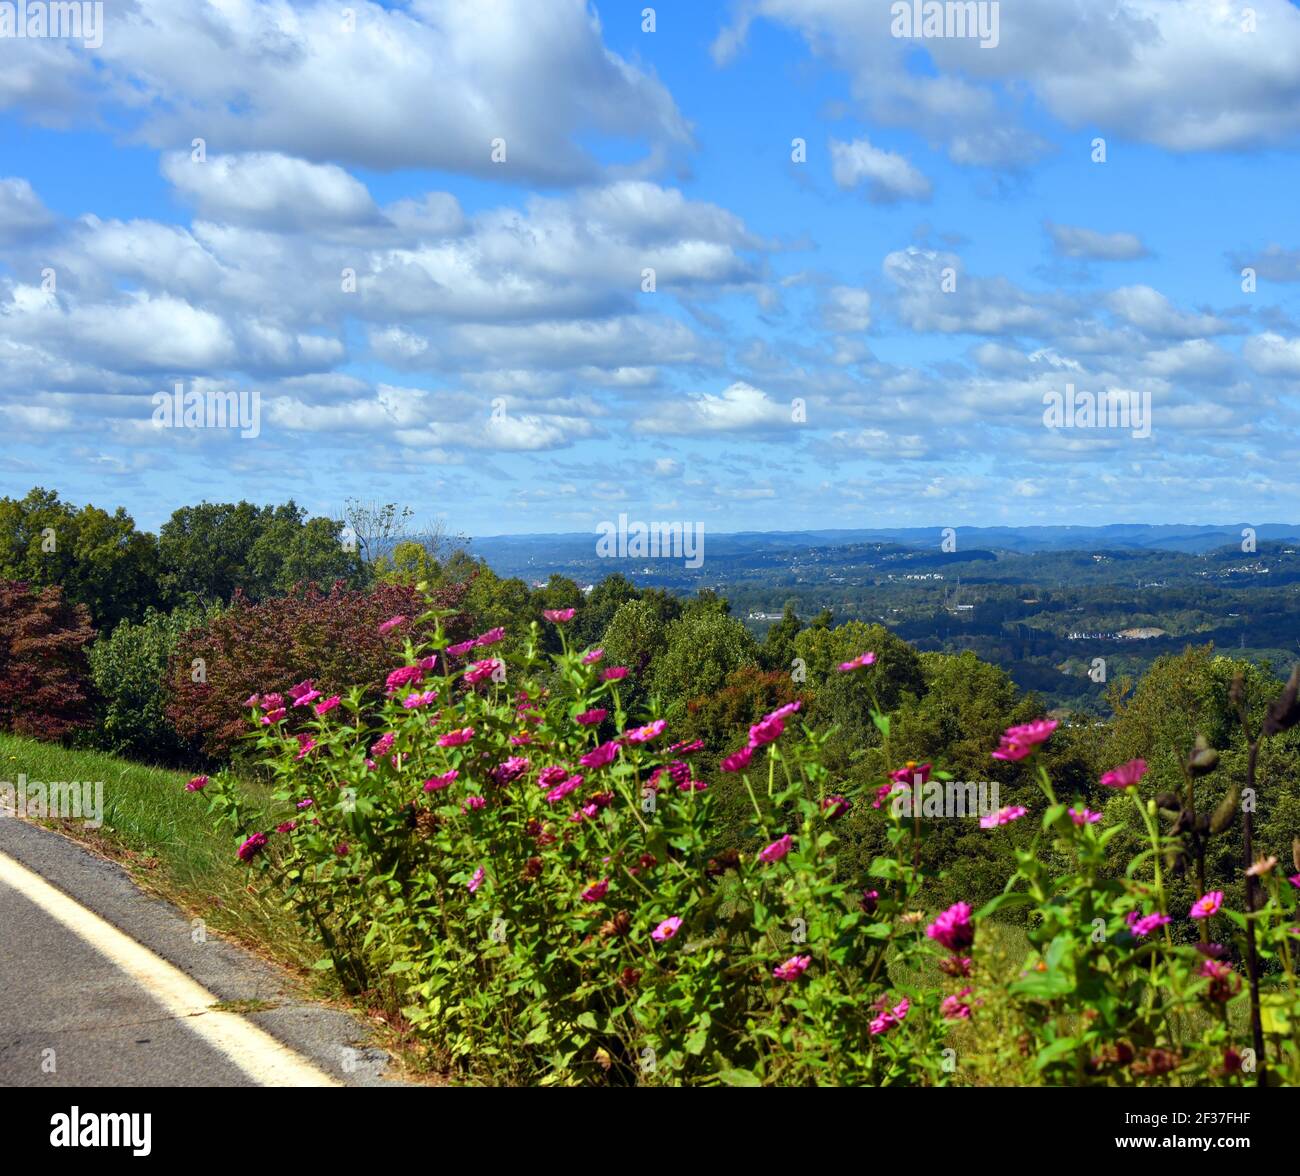 Mountain road opens up to show view of Kingsport, Tennessee in valley below.  Zineas bloom in brilliant pink besides the road. Stock Photo